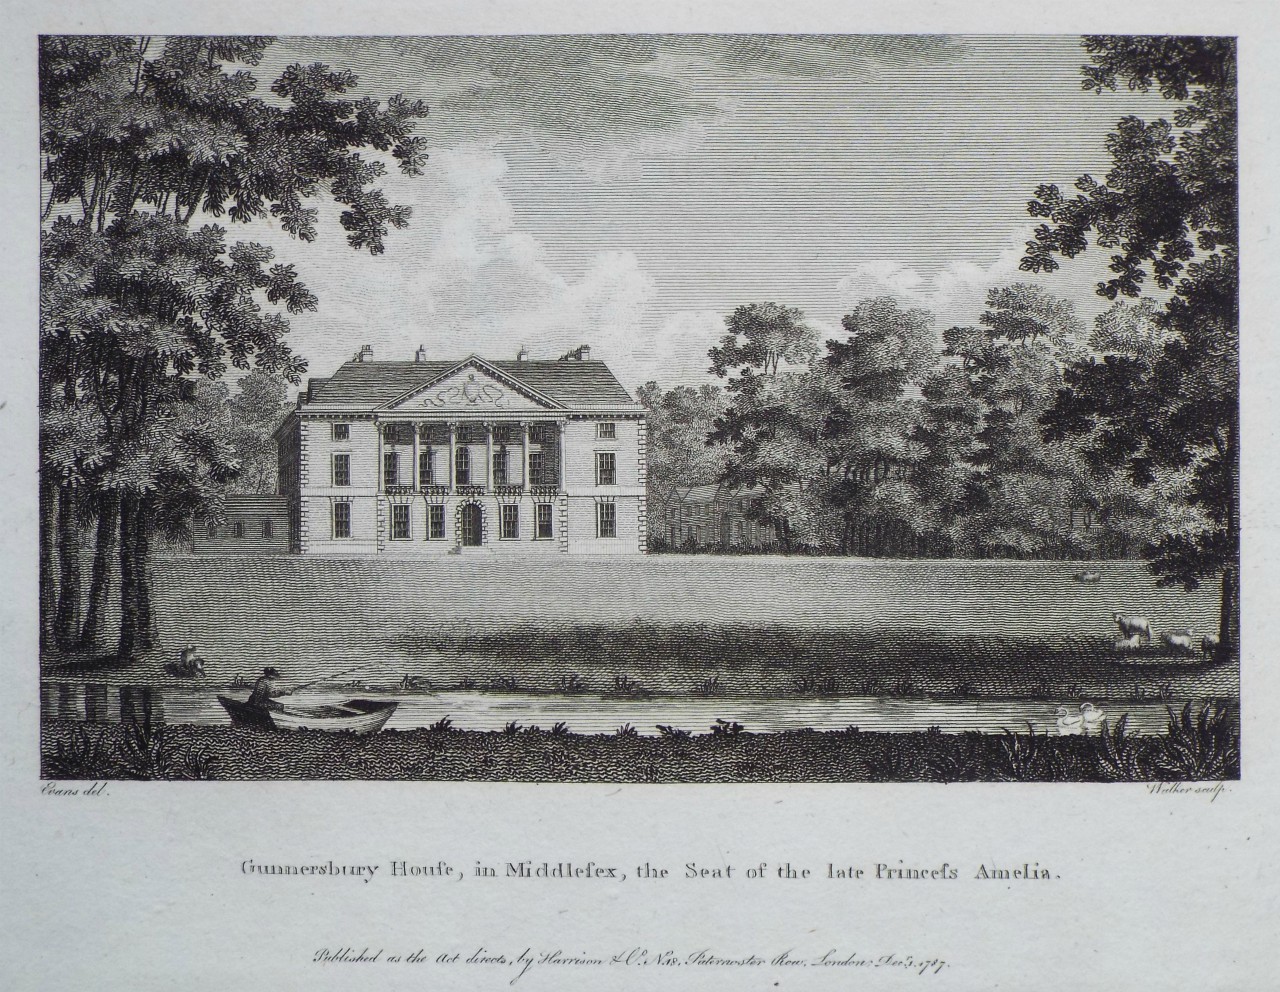 Print - Gunnersbury House, in Middlesex, the Seat of the late Princess Amelia. - 